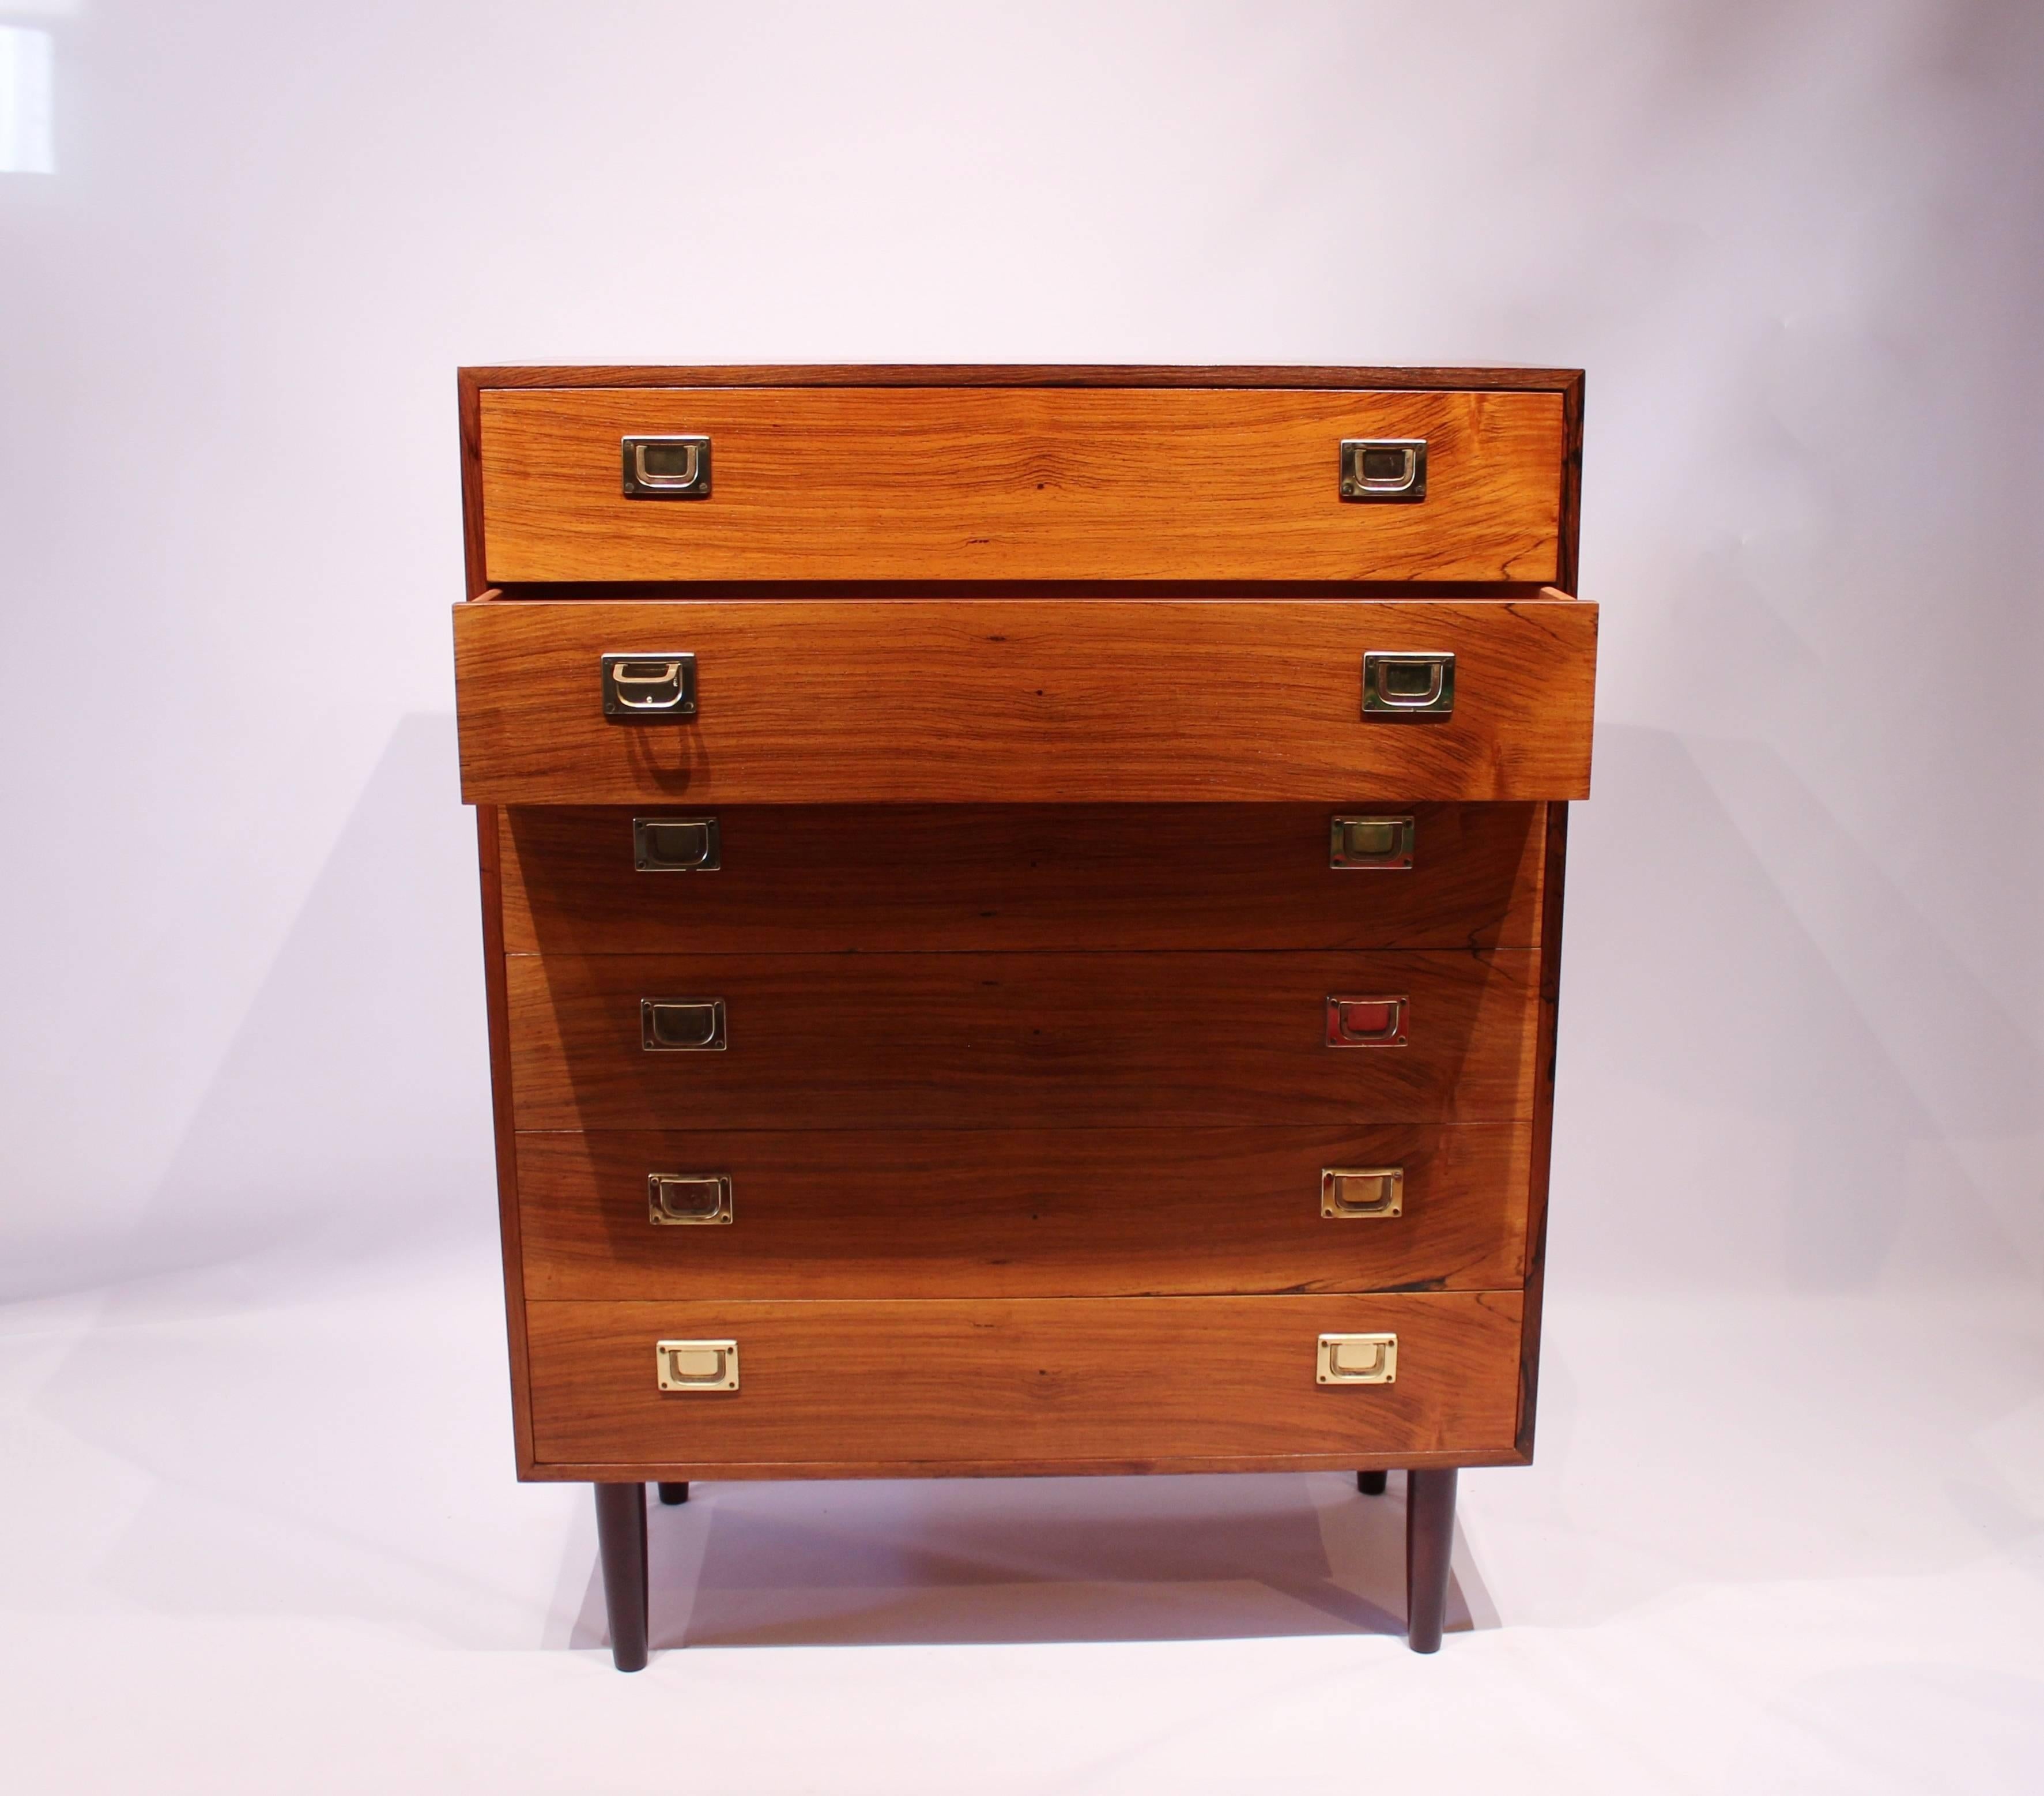 Chest of drawers in rosewood by the furniture factory, Reoval, of Danish design from the 1960s. The chest is in great vintage condition.